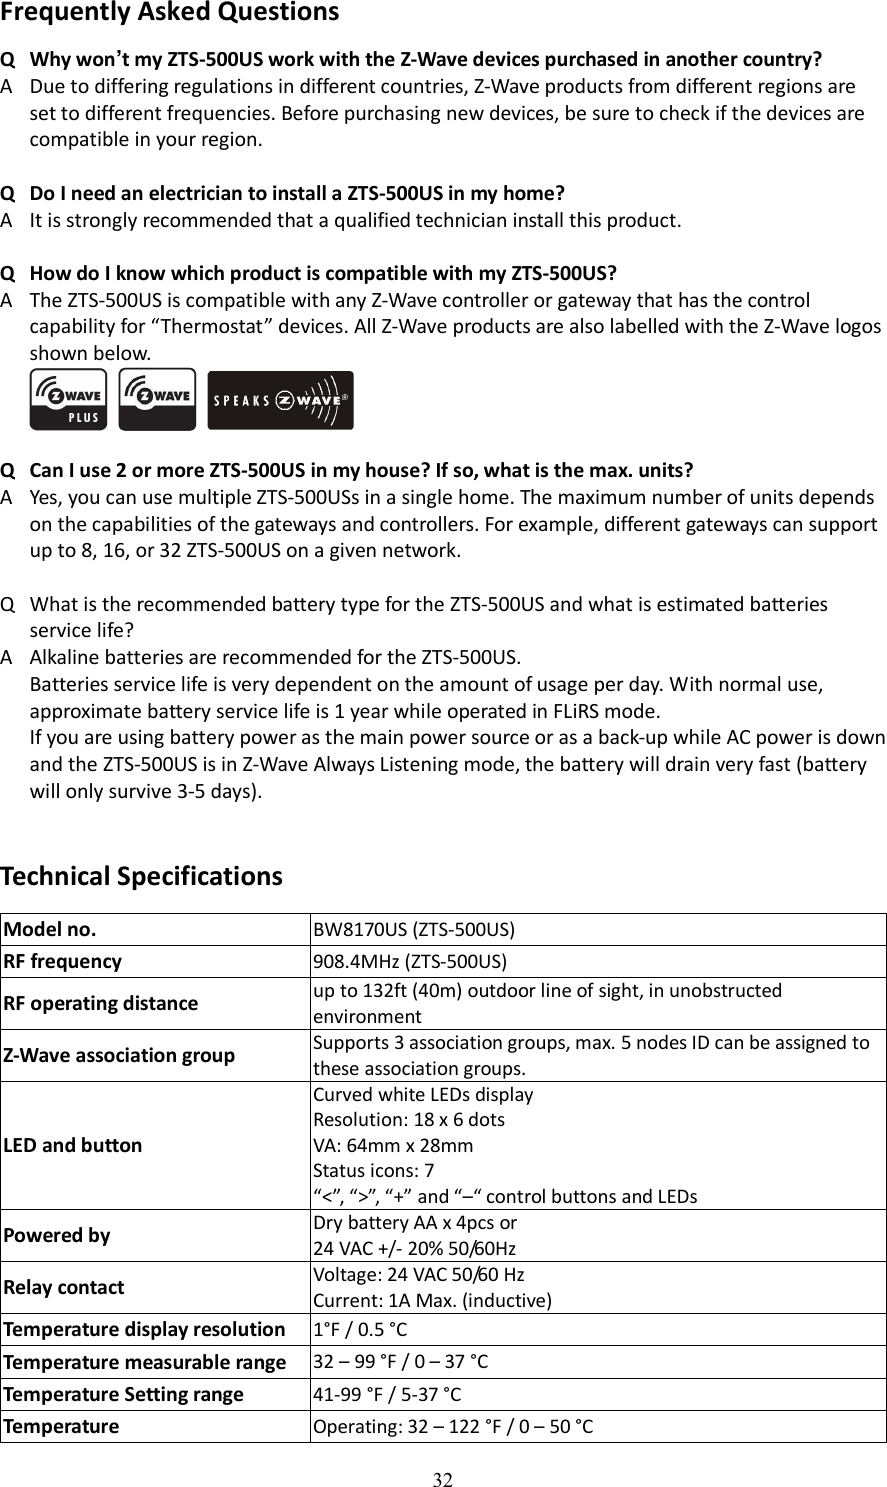 32  Frequently Asked Questions  Q  Why won’t my ZTS-500US work with the Z-Wave devices purchased in another country? A  Due to differing regulations in different countries, Z-Wave products from different regions are set to different frequencies. Before purchasing new devices, be sure to check if the devices are compatible in your region.    Q  Do I need an electrician to install a ZTS-500US in my home? A  It is strongly recommended that a qualified technician install this product.  Q  How do I know which product is compatible with my ZTS-500US? A   The ZTS-500US is compatible with any Z-Wave controller or gateway that has the control capability for “Thermostat” devices. All Z-Wave products are also labelled with the Z-Wave logos shown below.         Q  Can I use 2 or more ZTS-500US in my house? If so, what is the max. units? A  Yes, you can use multiple ZTS-500USs in a single home. The maximum number of units depends on the capabilities of the gateways and controllers. For example, different gateways can support up to 8, 16, or 32 ZTS-500US on a given network.    Q   What is the recommended battery type for the ZTS-500US and what is estimated batteries service life? A  Alkaline batteries are recommended for the ZTS-500US. Batteries service life is very dependent on the amount of usage per day. With normal use, approximate battery service life is 1 year while operated in FLiRS mode. If you are using battery power as the main power source or as a back-up while AC power is down and the ZTS-500US is in Z-Wave Always Listening mode, the battery will drain very fast (battery will only survive 3-5 days).   Technical Specifications  Model no.  BW8170US (ZTS-500US) RF frequency  908.4MHz (ZTS-500US) RF operating distance up to 132ft (40m) outdoor line of sight, in unobstructed environment Z-Wave association group Supports 3 association groups, max. 5 nodes ID can be assigned to these association groups. LED and button Curved white LEDs display Resolution: 18 x 6 dots VA: 64mm x 28mm Status icons: 7   “&lt;”, “&gt;”, “+” and “–“ control buttons and LEDs Powered by Dry battery AA x 4pcs or 24 VAC +/- 20% 50/60Hz Relay contact   Voltage: 24 VAC 50/60 Hz Current: 1A Max. (inductive) Temperature display resolution  1°F / 0.5 °C Temperature measurable range  32 – 99 °F / 0 – 37 °C Temperature Setting range  41-99 °F / 5-37 °C Temperature  Operating: 32 – 122 °F / 0 – 50 °C 